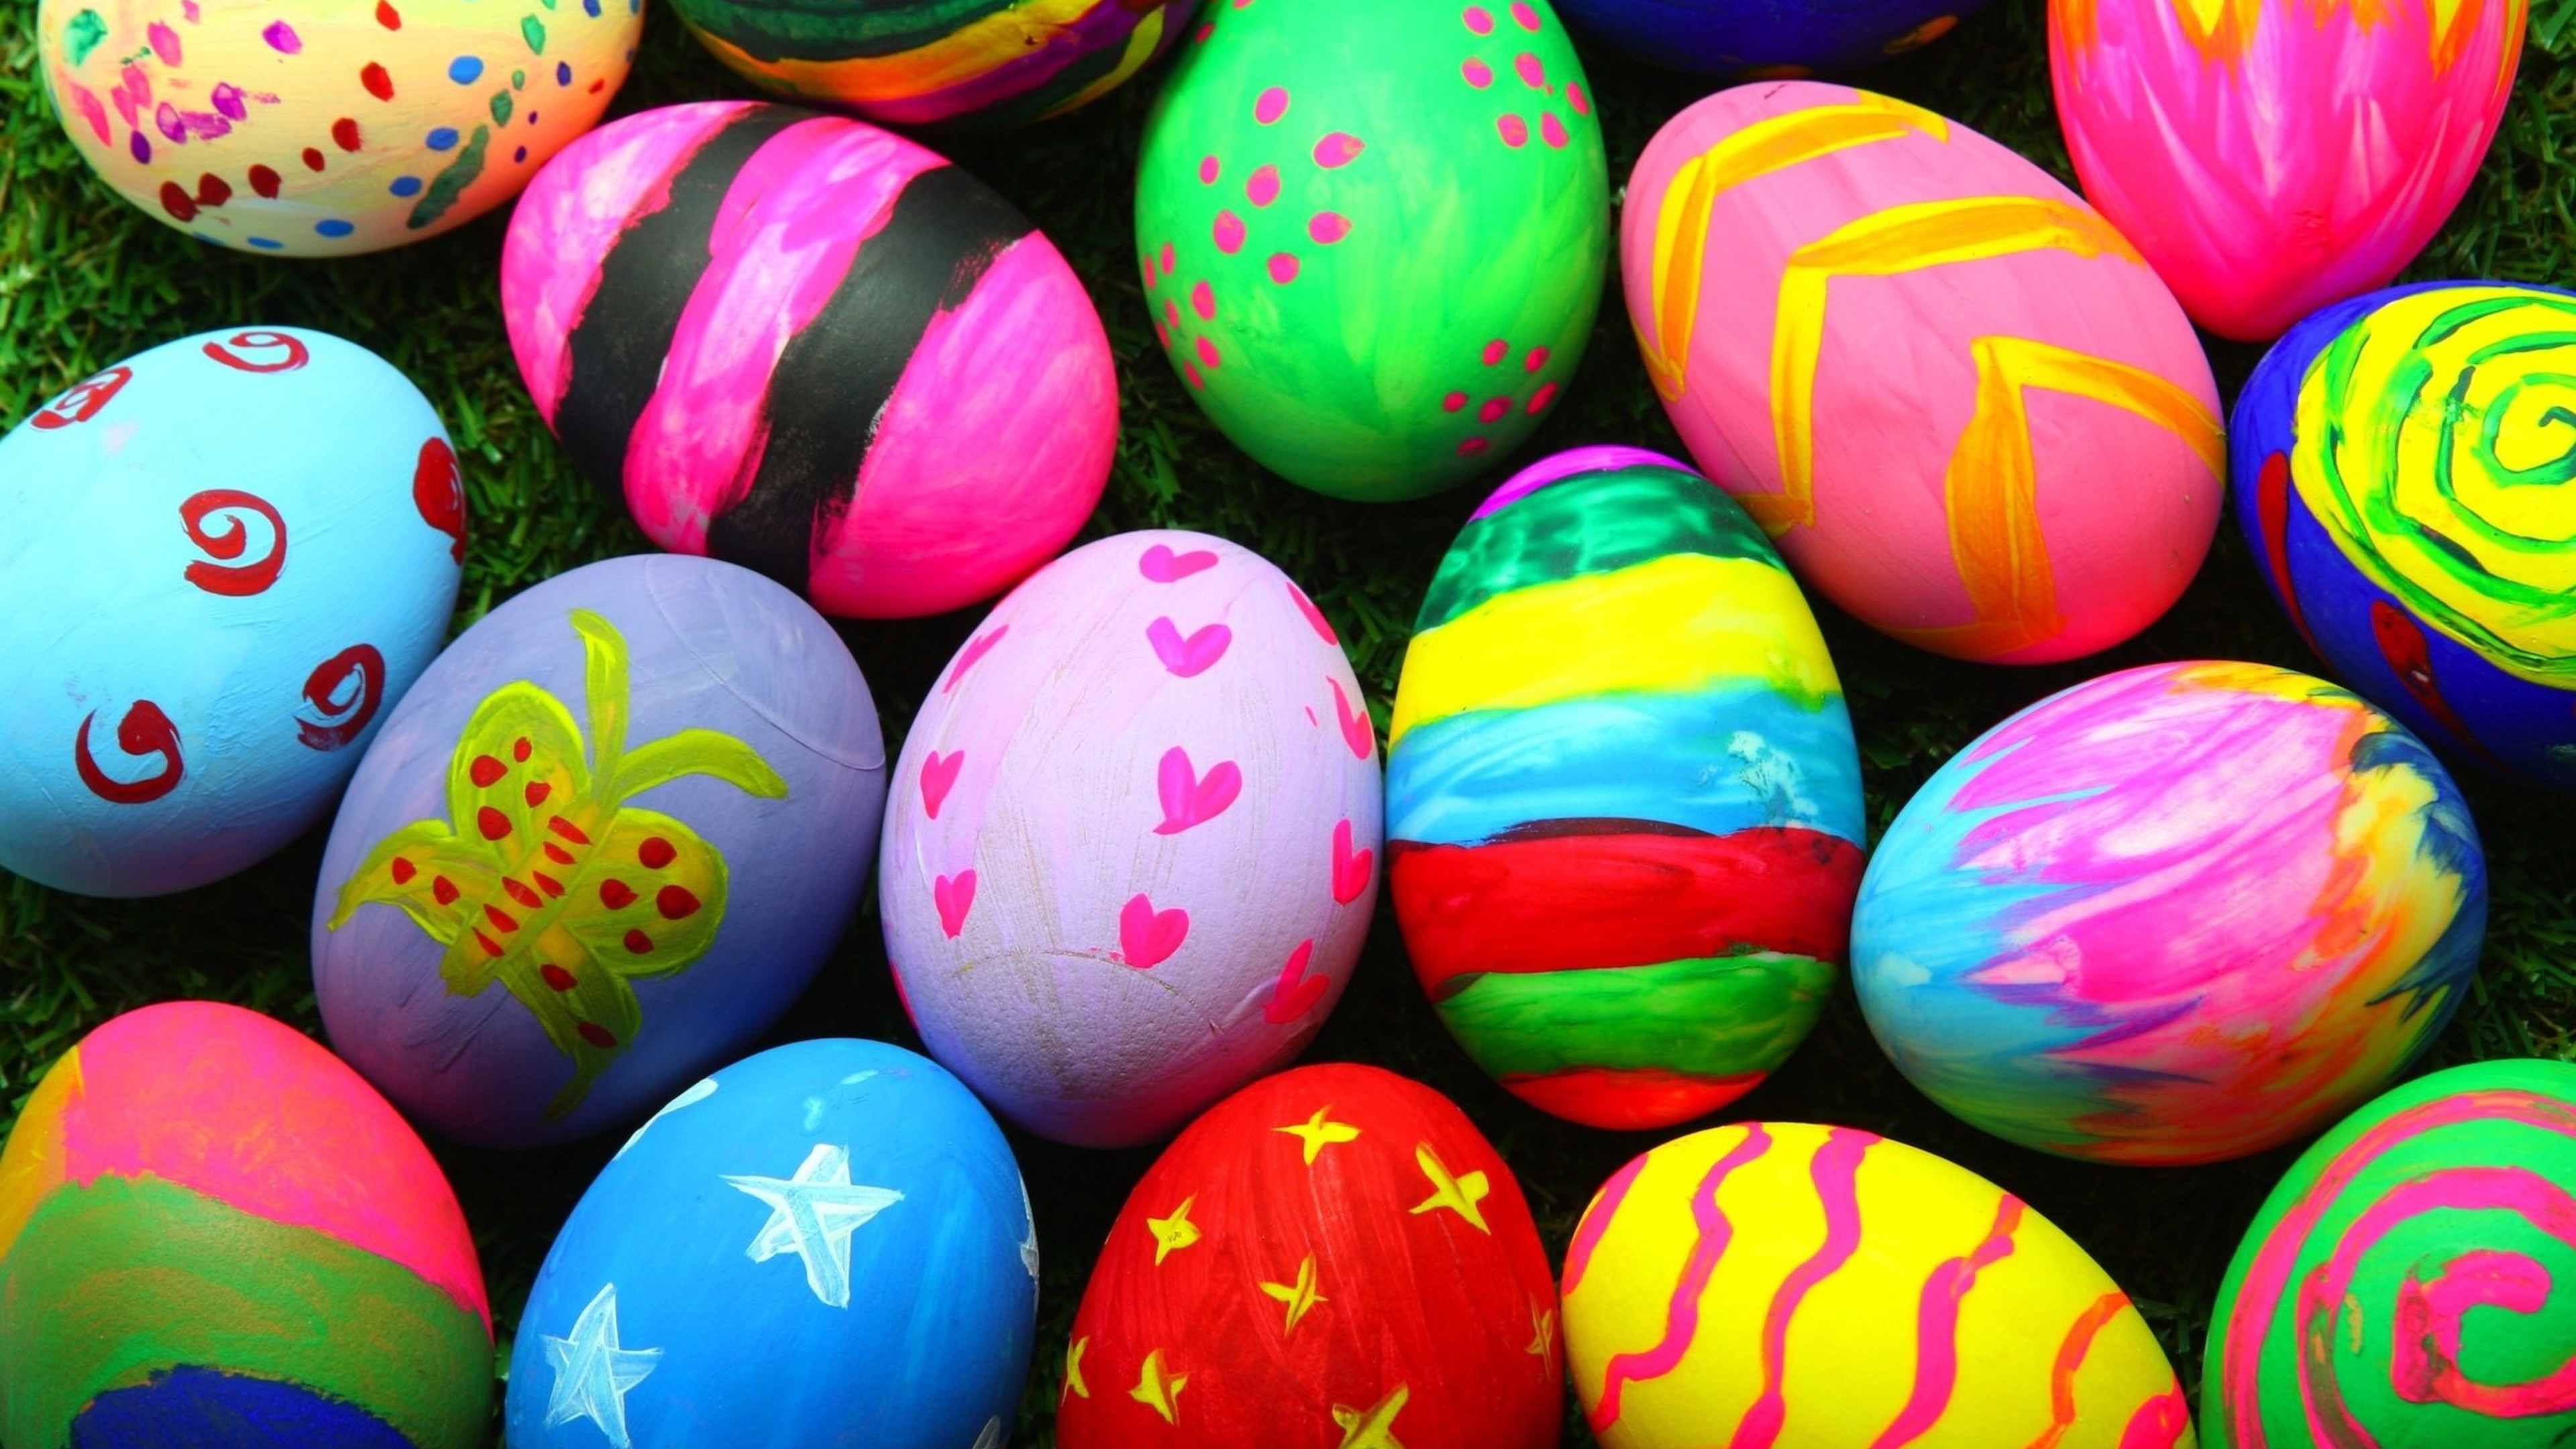 3840x2160 Colorful Easter Eggs